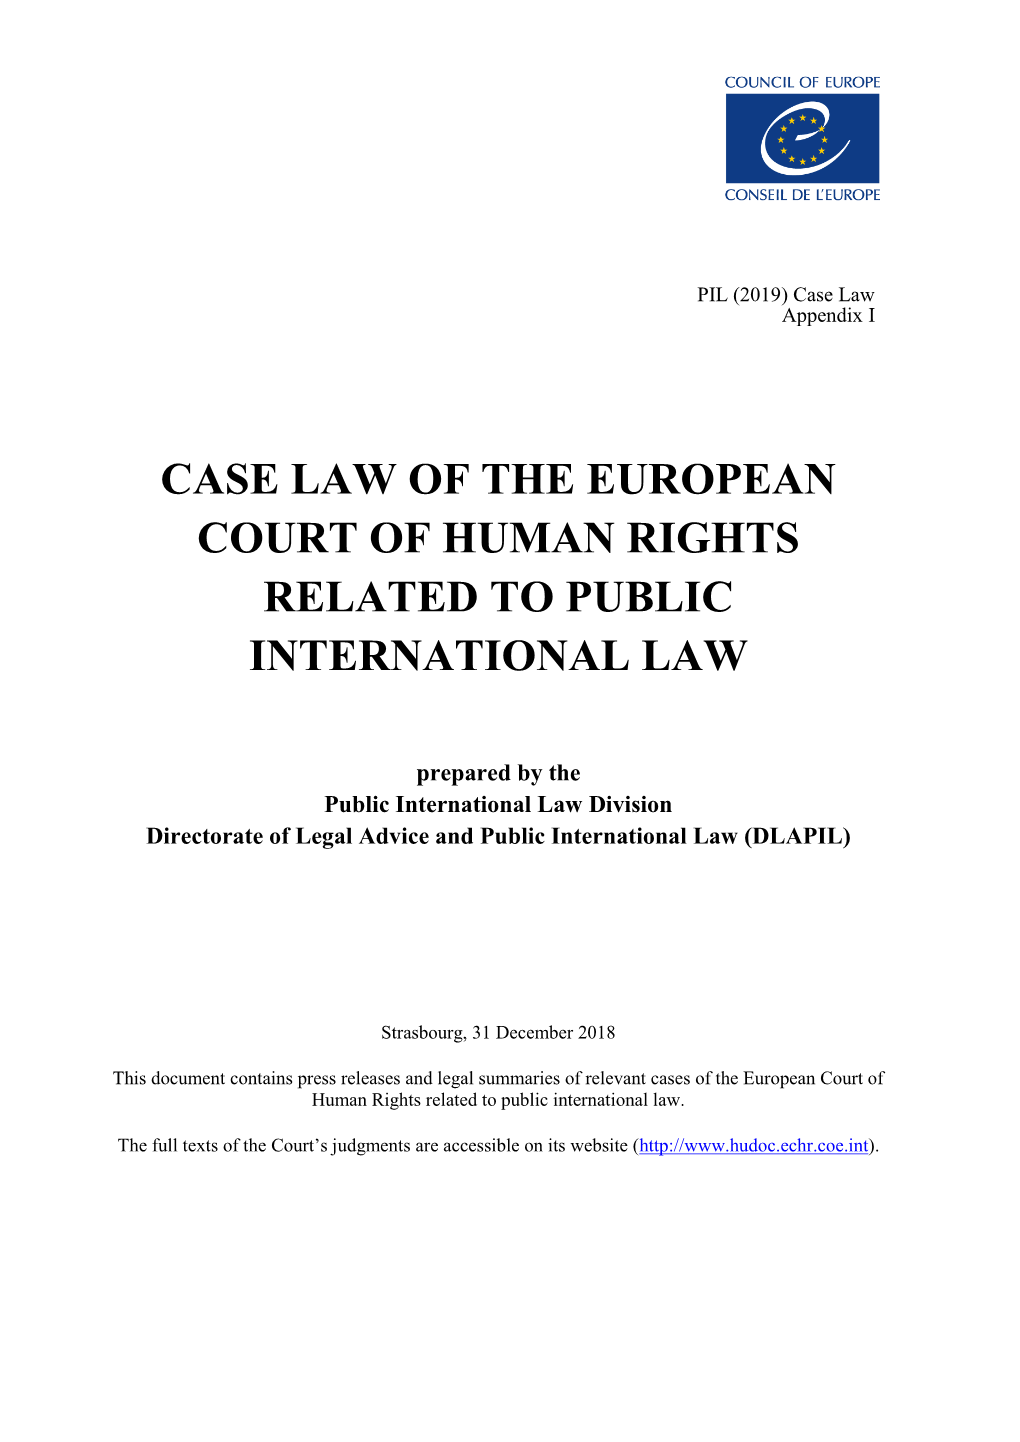 Case Law of the European Court of Human Rights Related to Public International Law